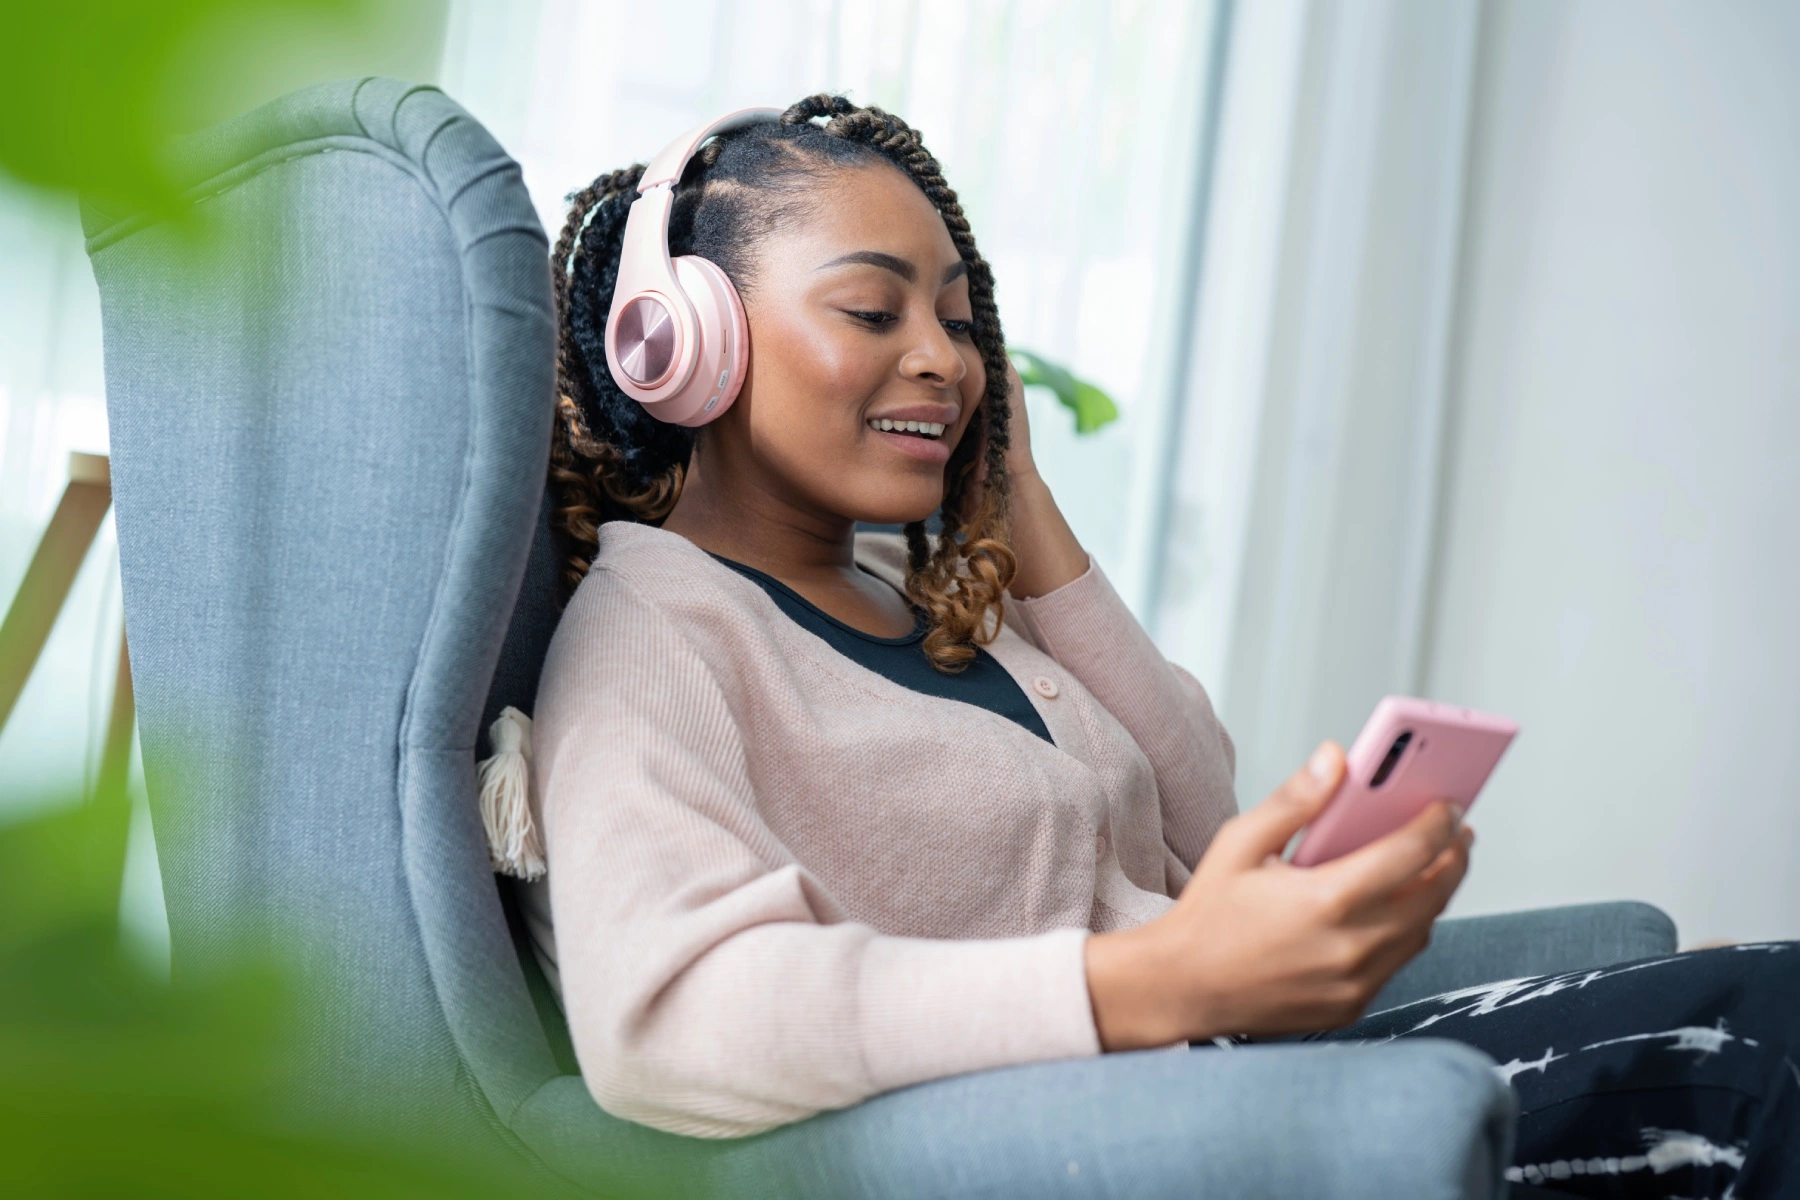 a woman of color relaxing in an armchair and wearing headphones as she looks down at her smartphone in her hand